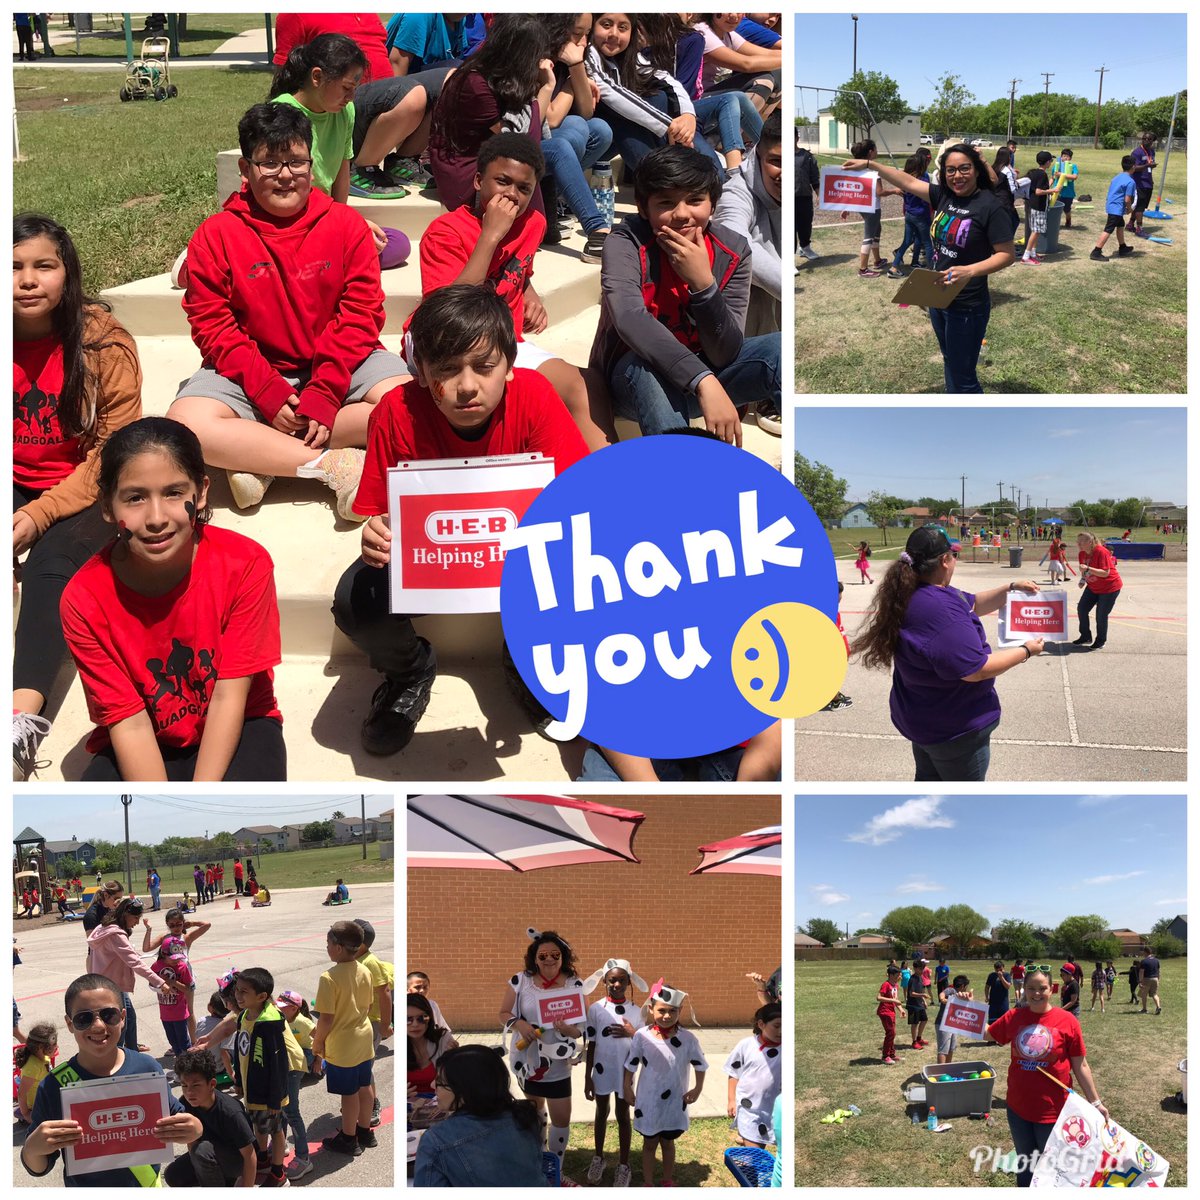 Field Day 2019 was awesome! Thanks @HEB for supporting our day! The students had so much fun and were able to stay hydrated! #HEBHelpingHere  @NISDmartin